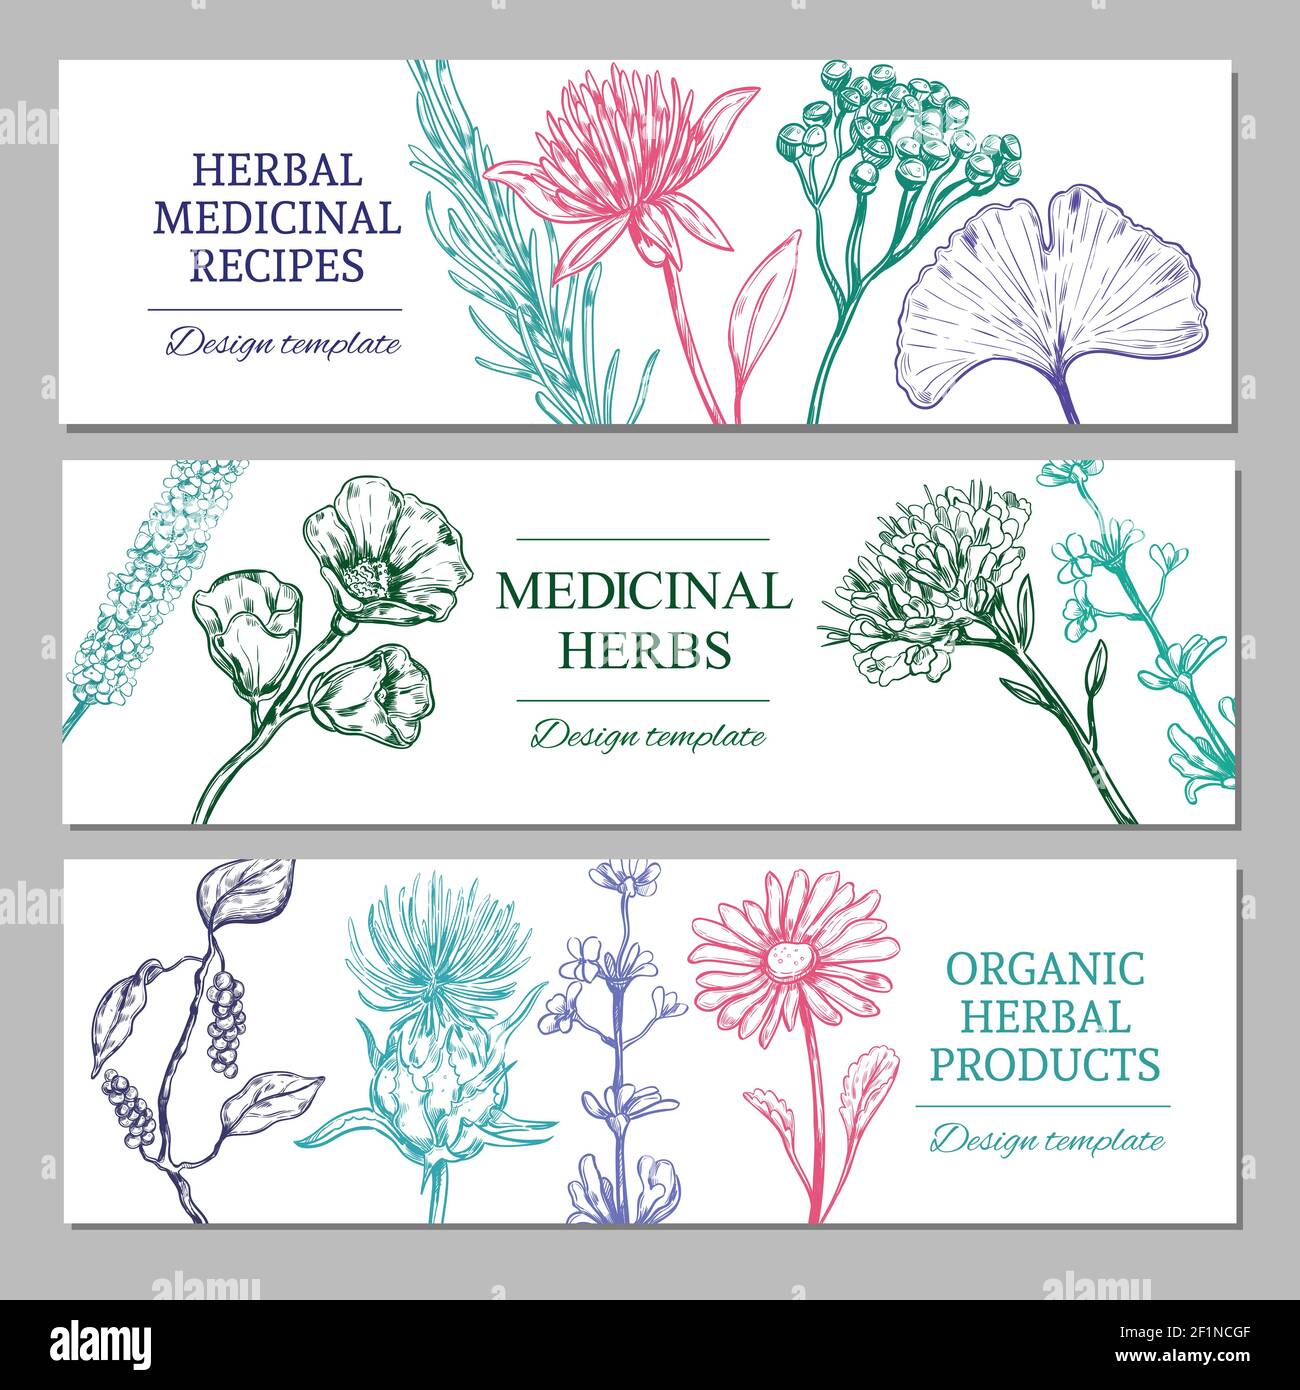 Medicinal herbs horizontal banners with different organic healthy spices Stock Vector